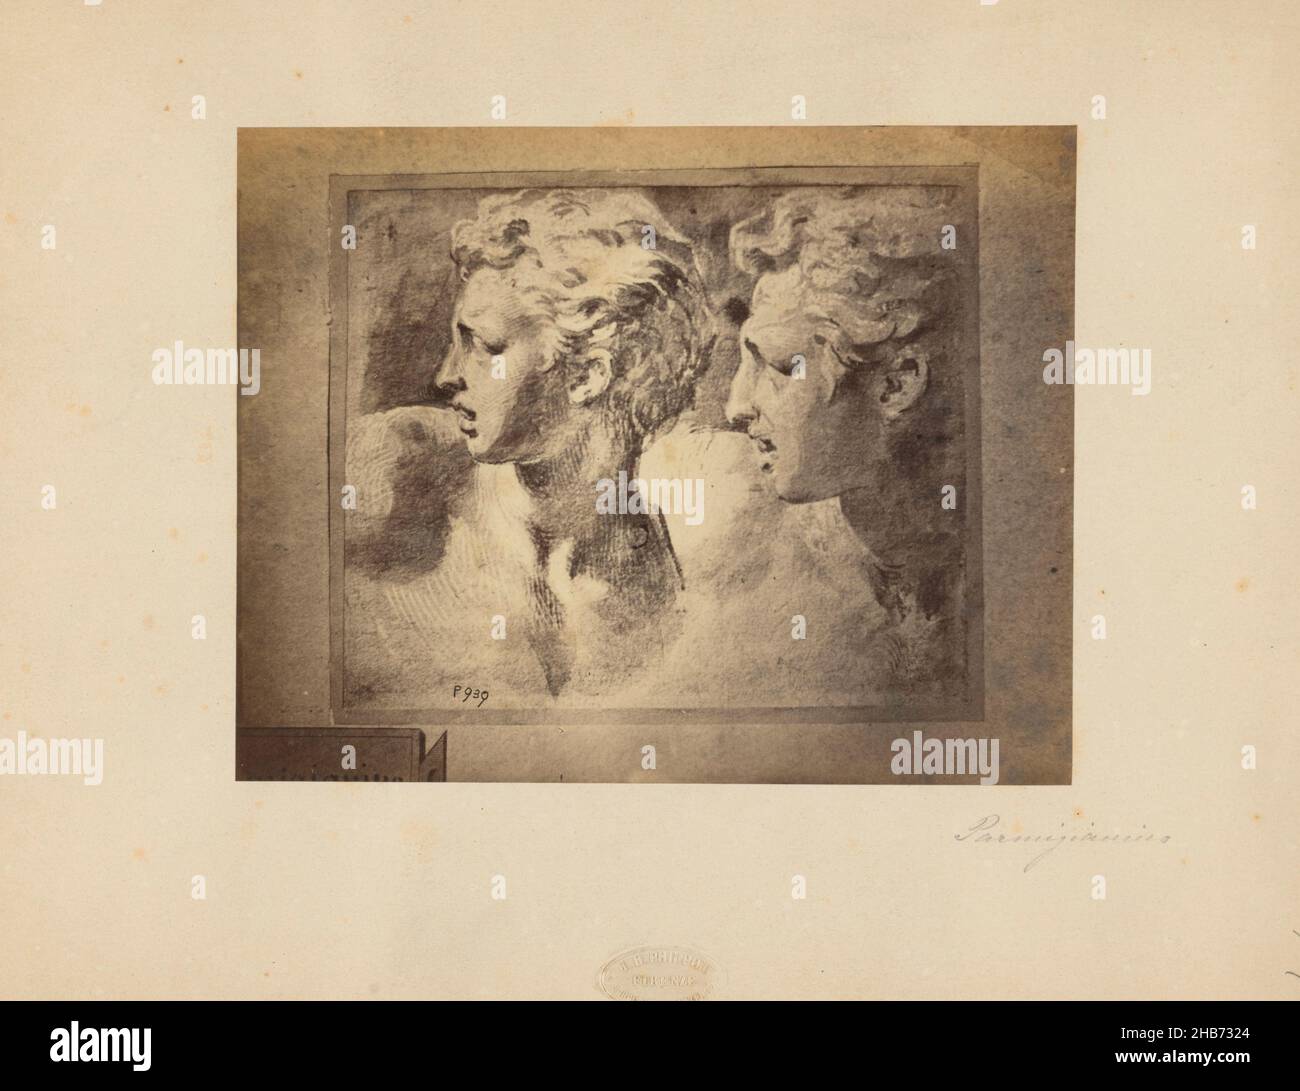 Photoreproduction of drawing of two male heads of Parmigianino, Giovanni Brampton Philpot (mentioned on object), intermediary draughtsman: Parmigianino (mentioned on object), Florence, 1851 - 1878, paper, cardboard, albumen print, height 152 mm × width 193 mmheight 246 mm × width 321 mm Stock Photo